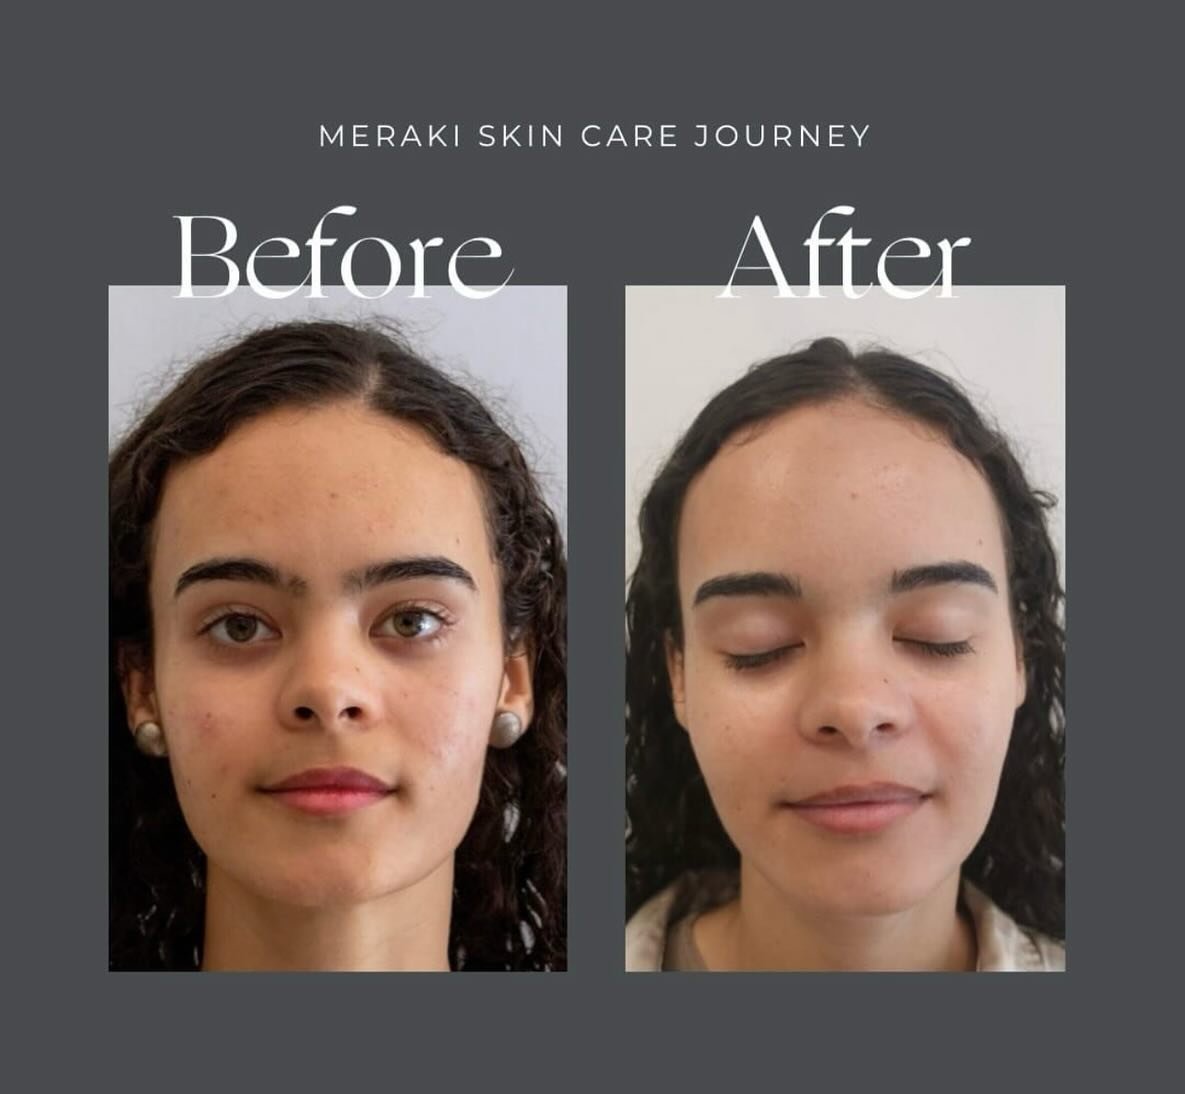 SWIPE to see Meraki&rsquo;s Skin Care Journey 👉 with our Recovery Treatment you can restore your skin&rsquo;s natural radiance. Say goodbye to blemishes, dullness, and irritation as we rejuvenate and revitalize your complexion. Embrace the glow of h